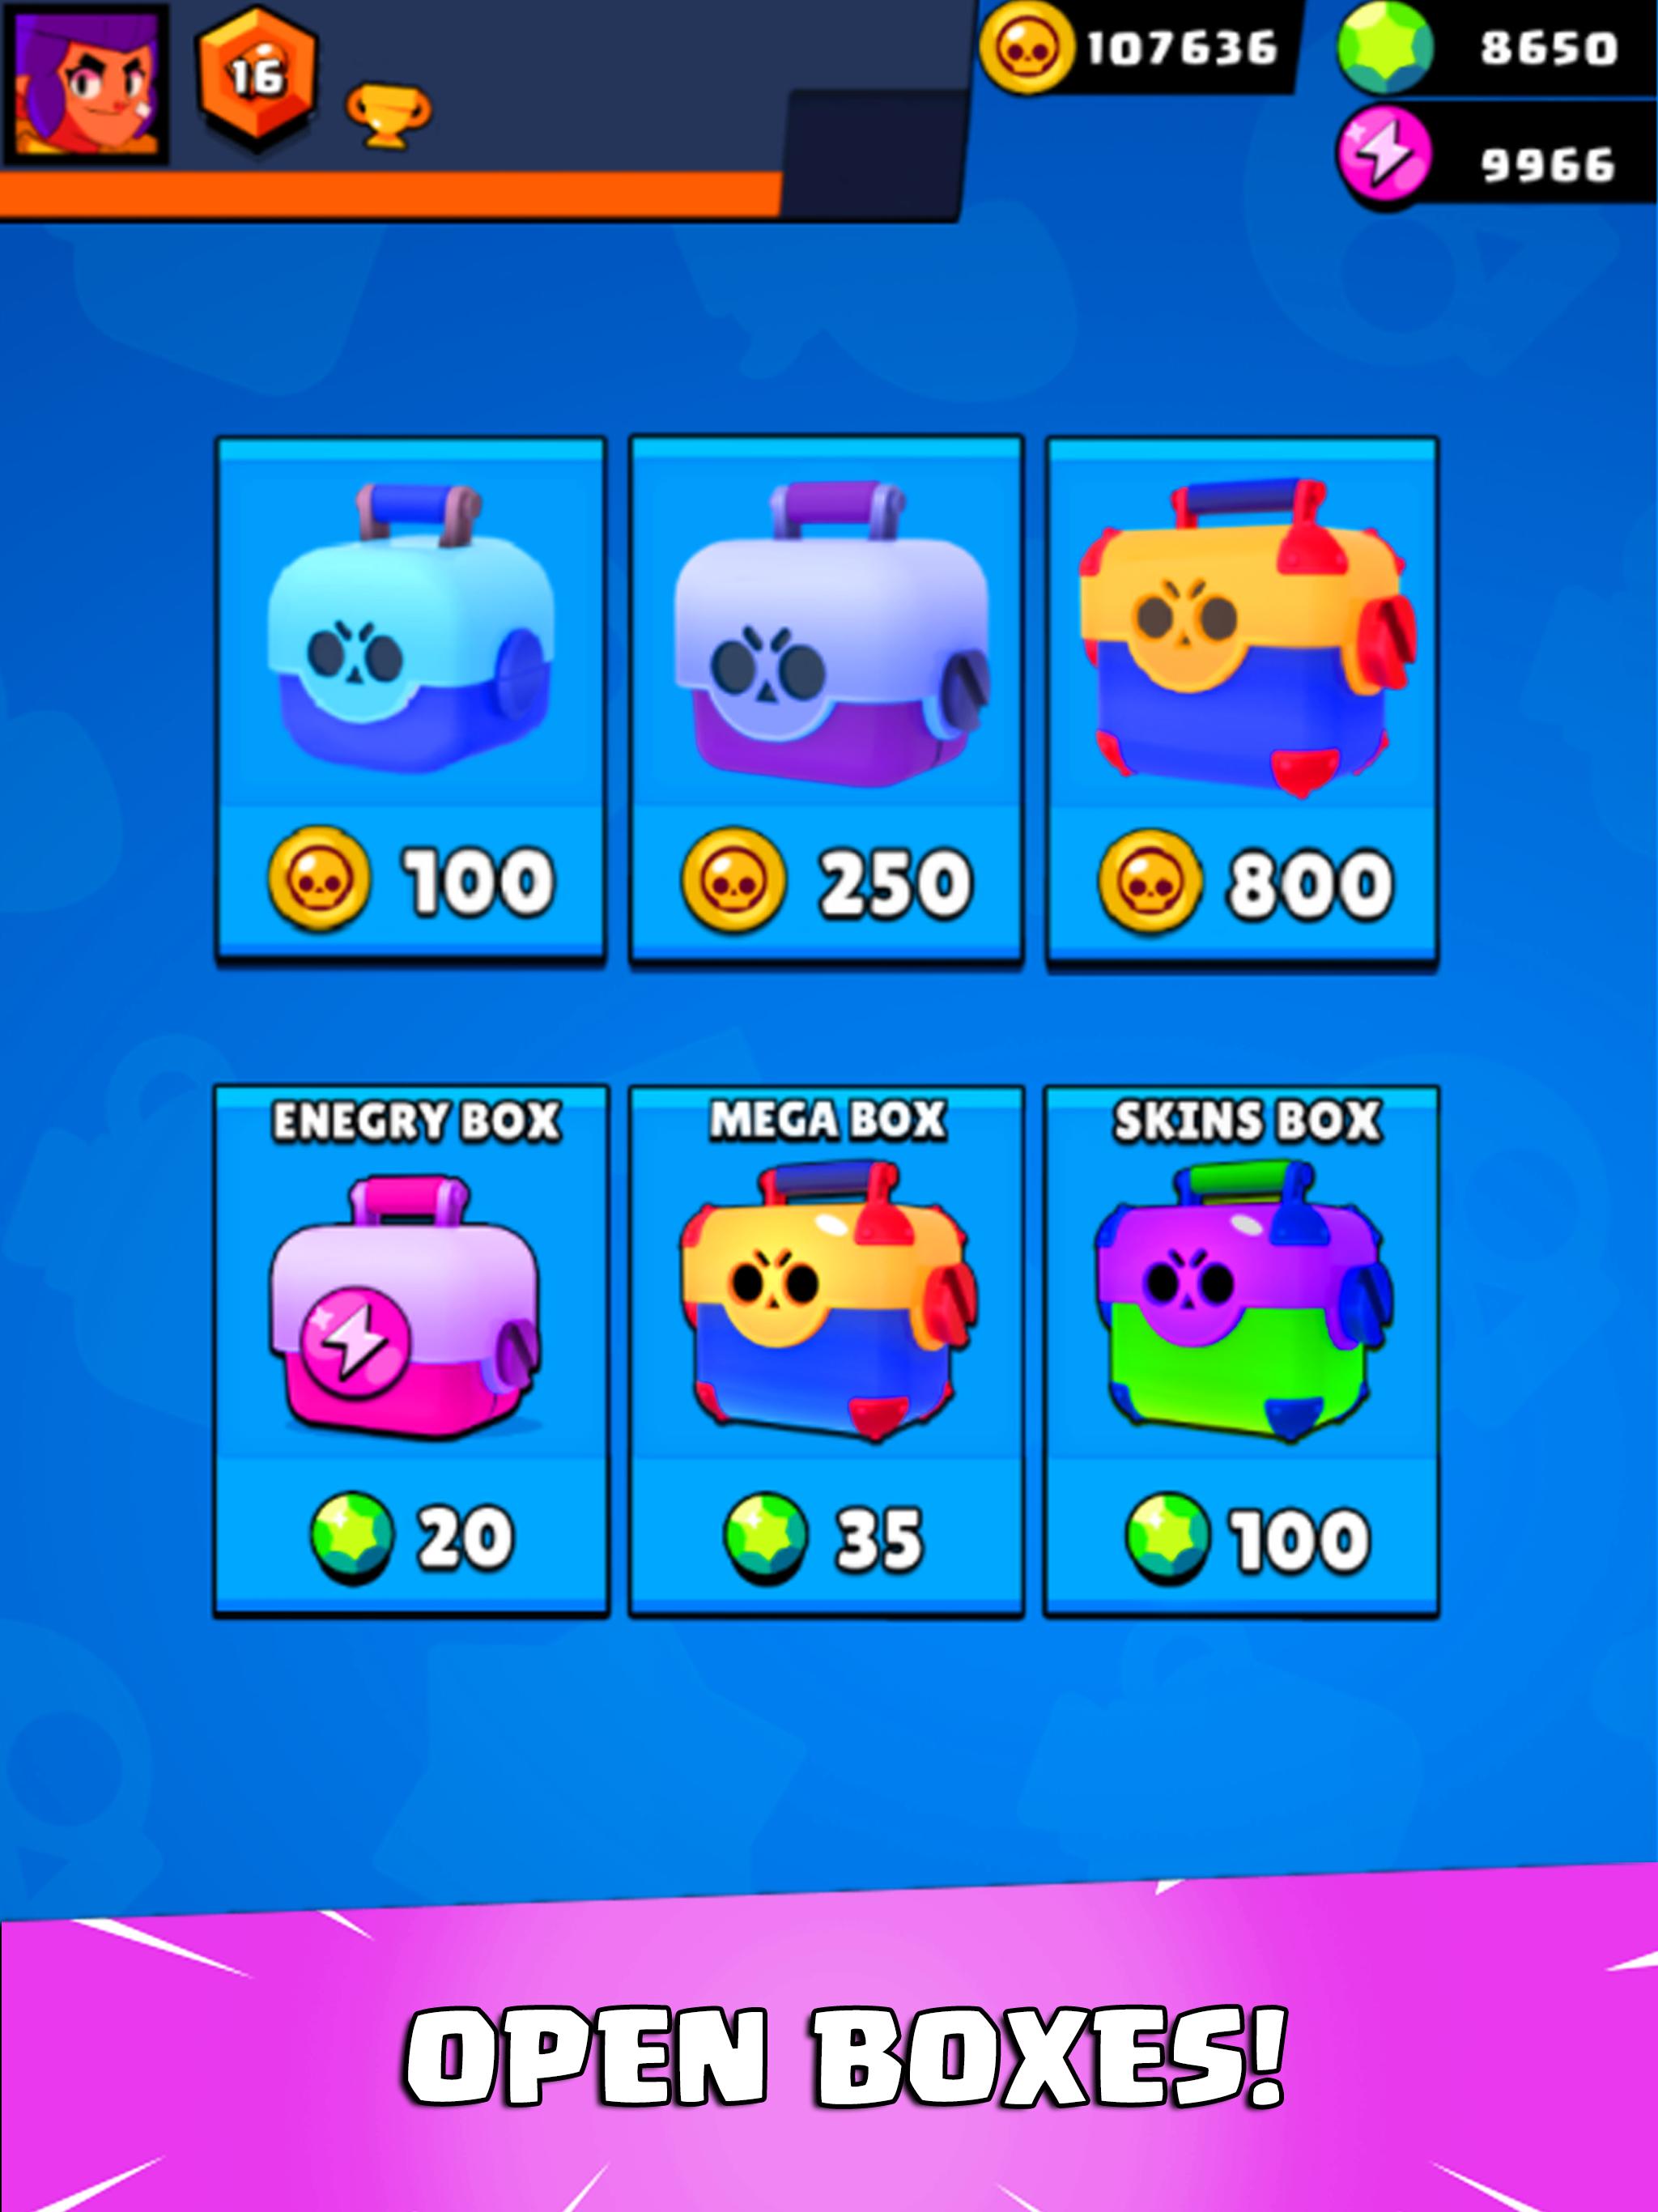 Box Opener For Brawl Stars for Android - APK Download